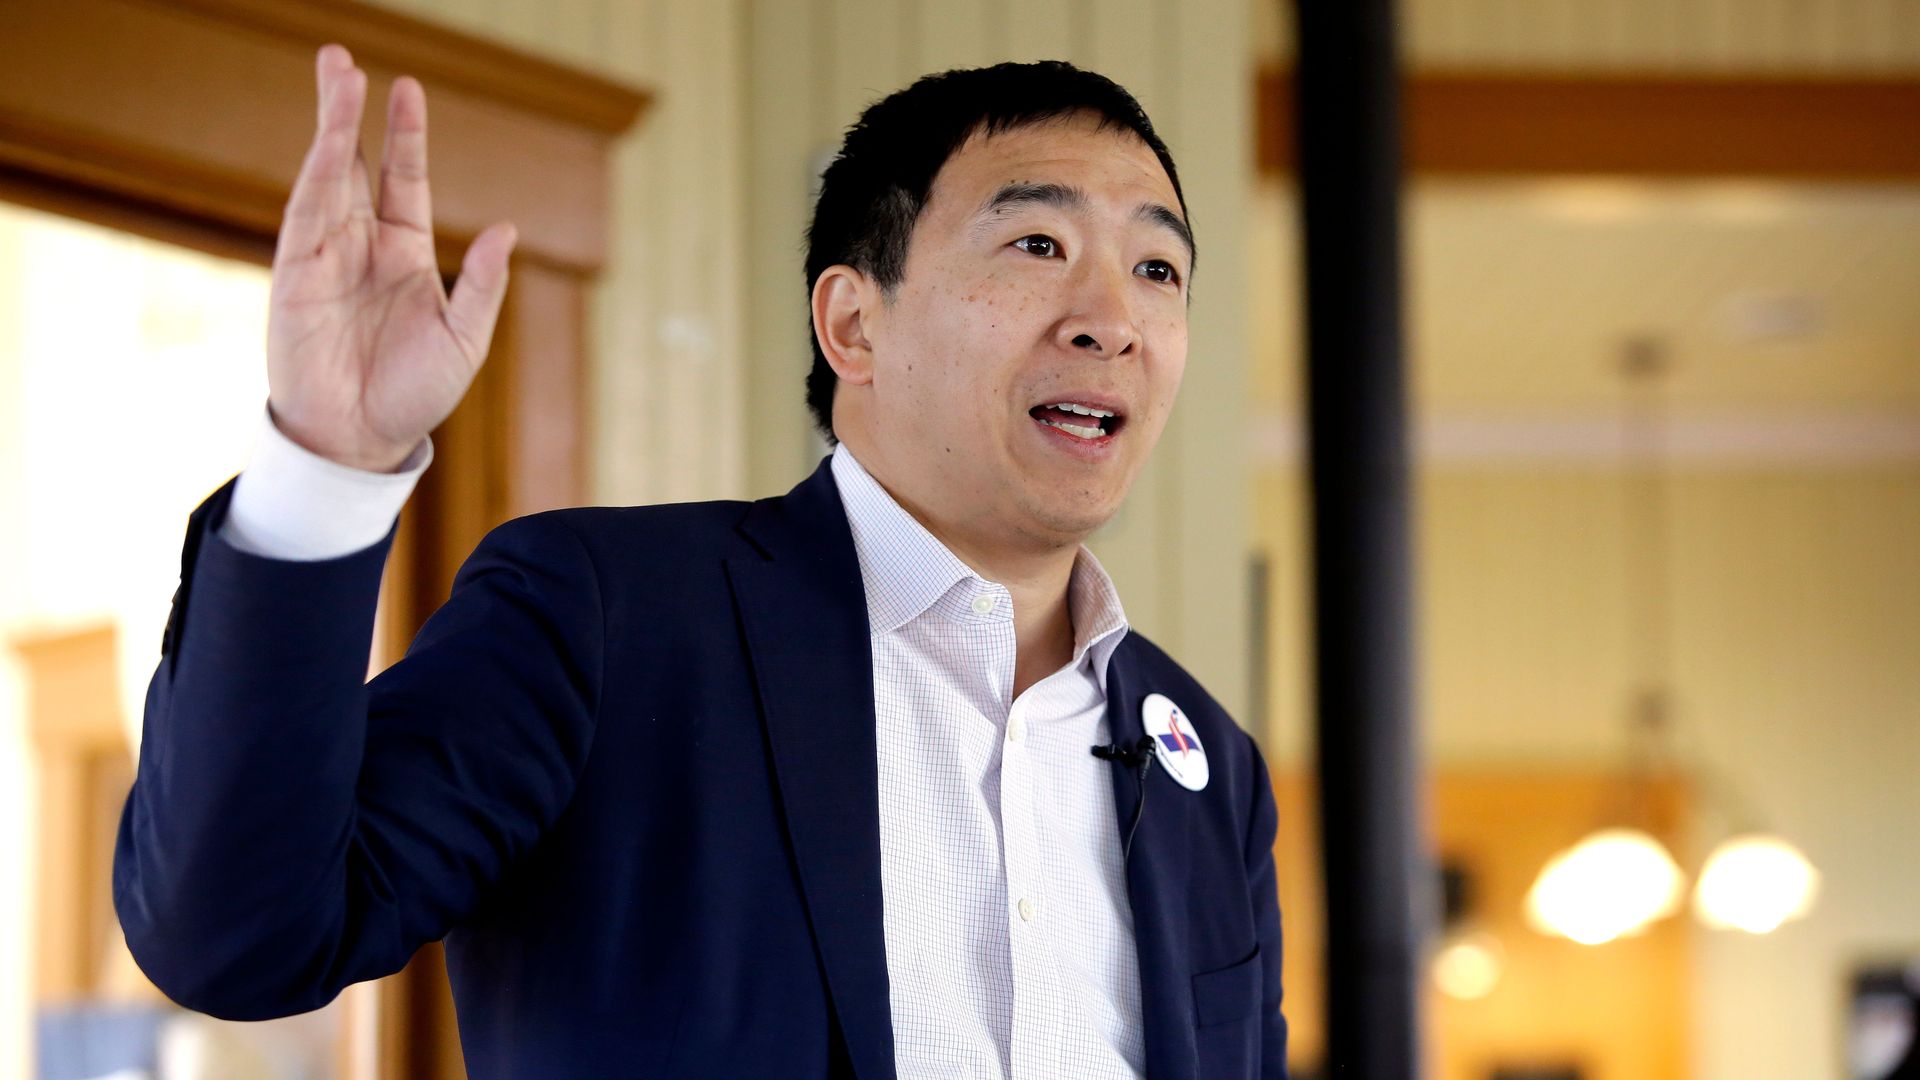 Andrew Yang speaks at a train depot in Iowa on February 1, 2019